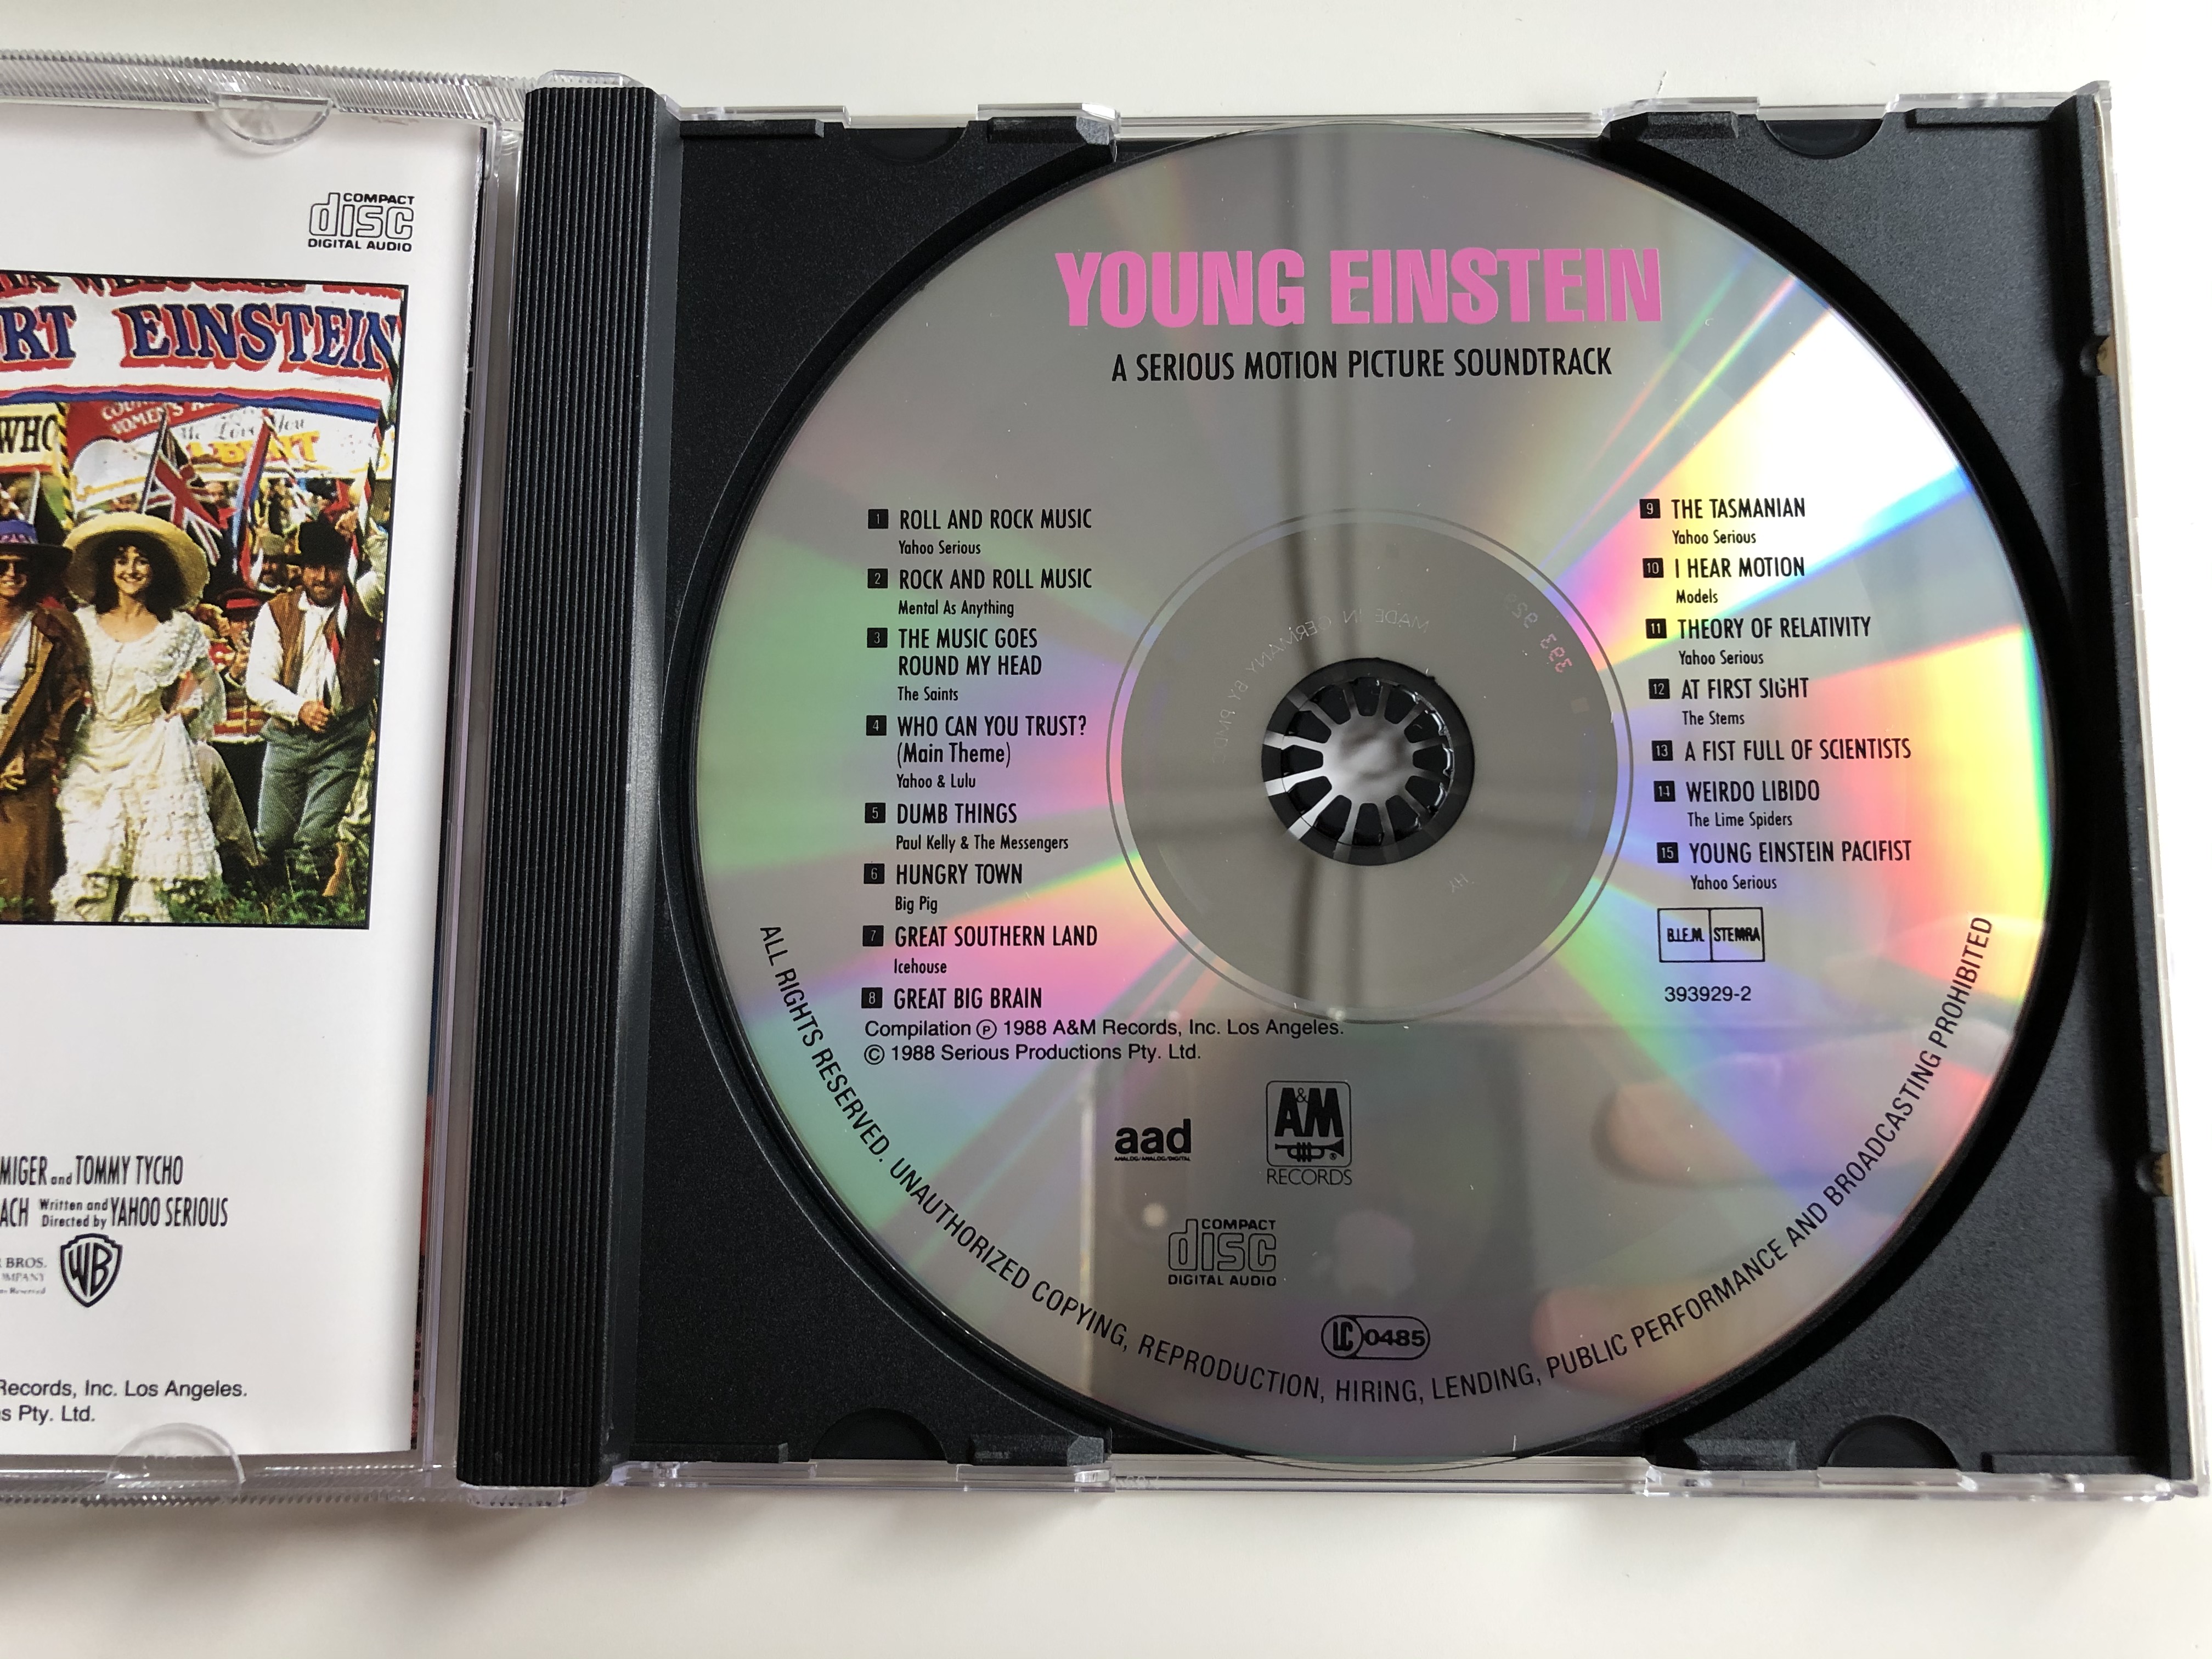 yahoo-serious-is-young-einstein-a-serious-motion-picture-soundtrack-featuring-icehouse-mental-as-anything-paul-kelly-and-the-messengers-big-pig-the-saints-models-the-lime-spiders-the-3-.jpg